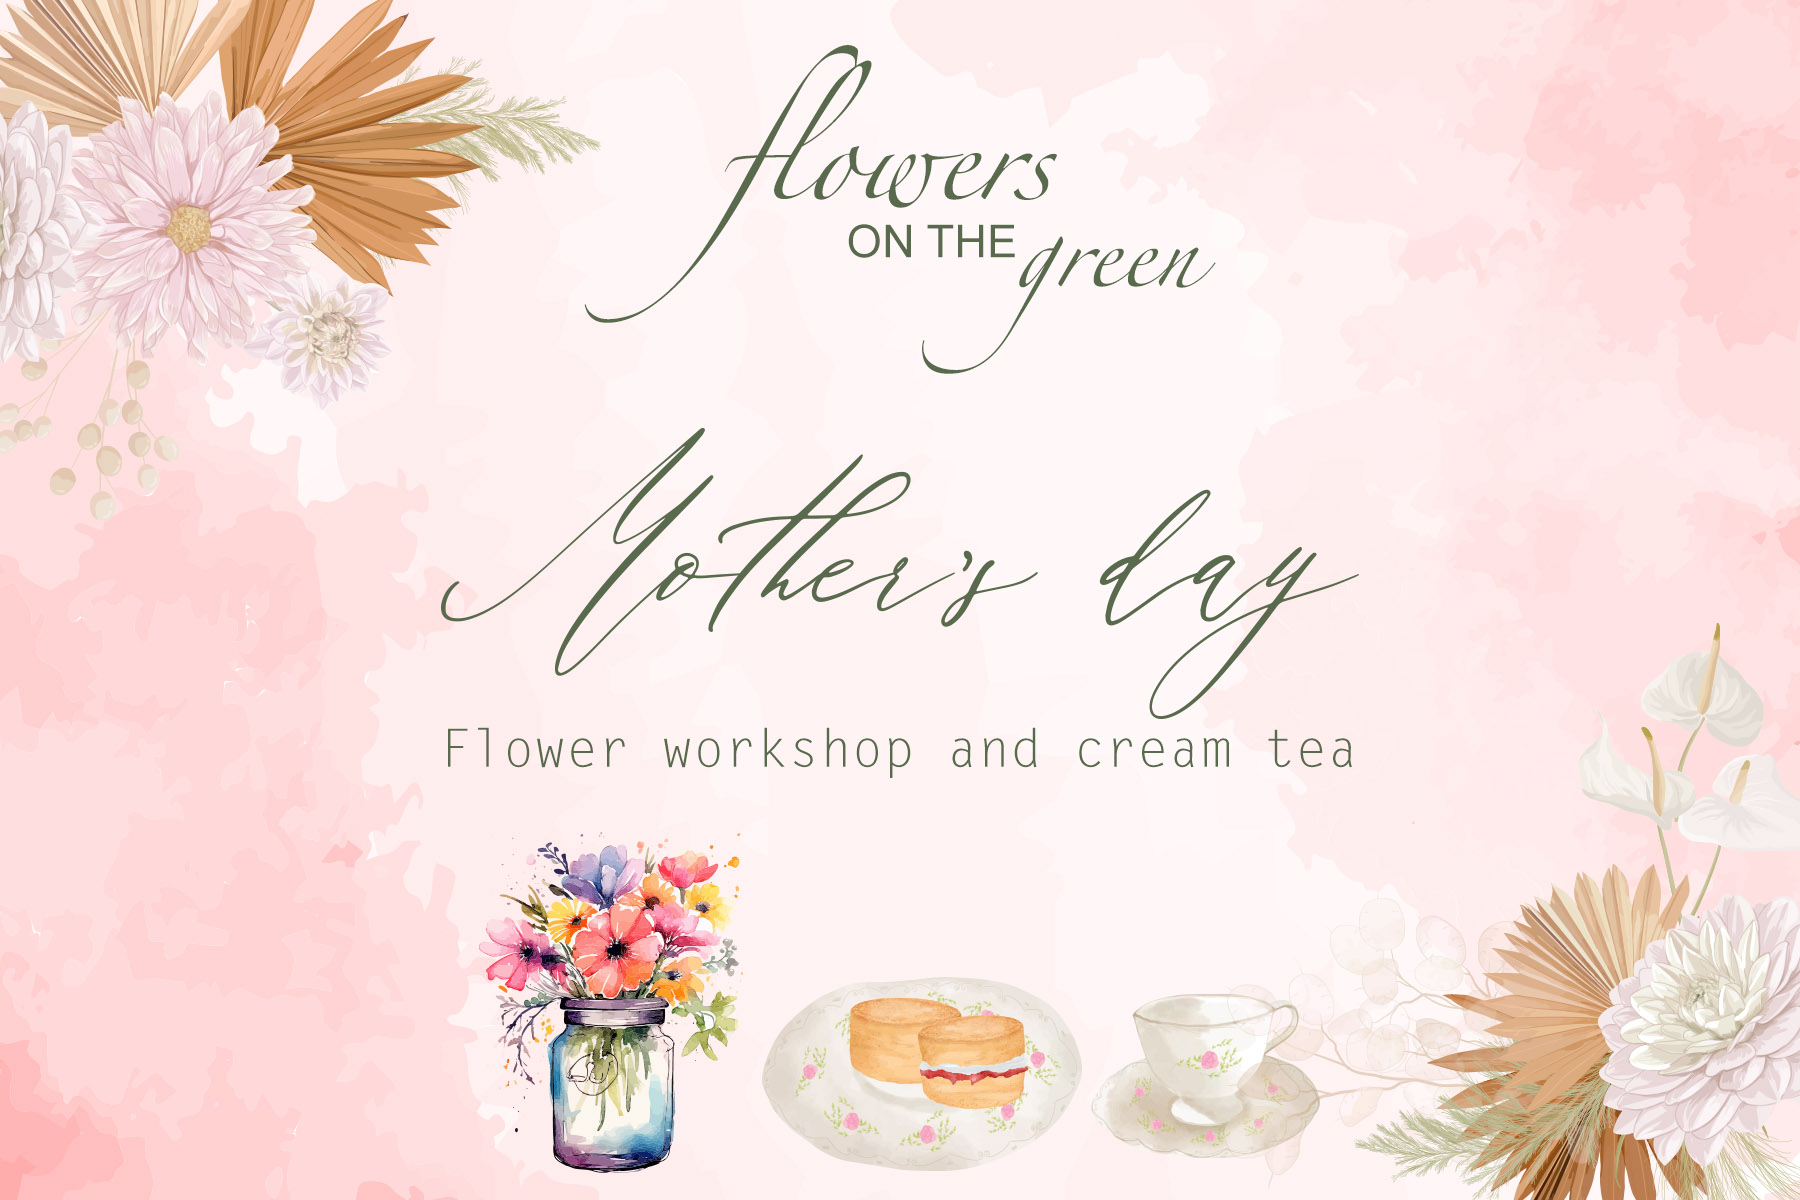 Mother’s Day Flower Workshop and Cream Tea